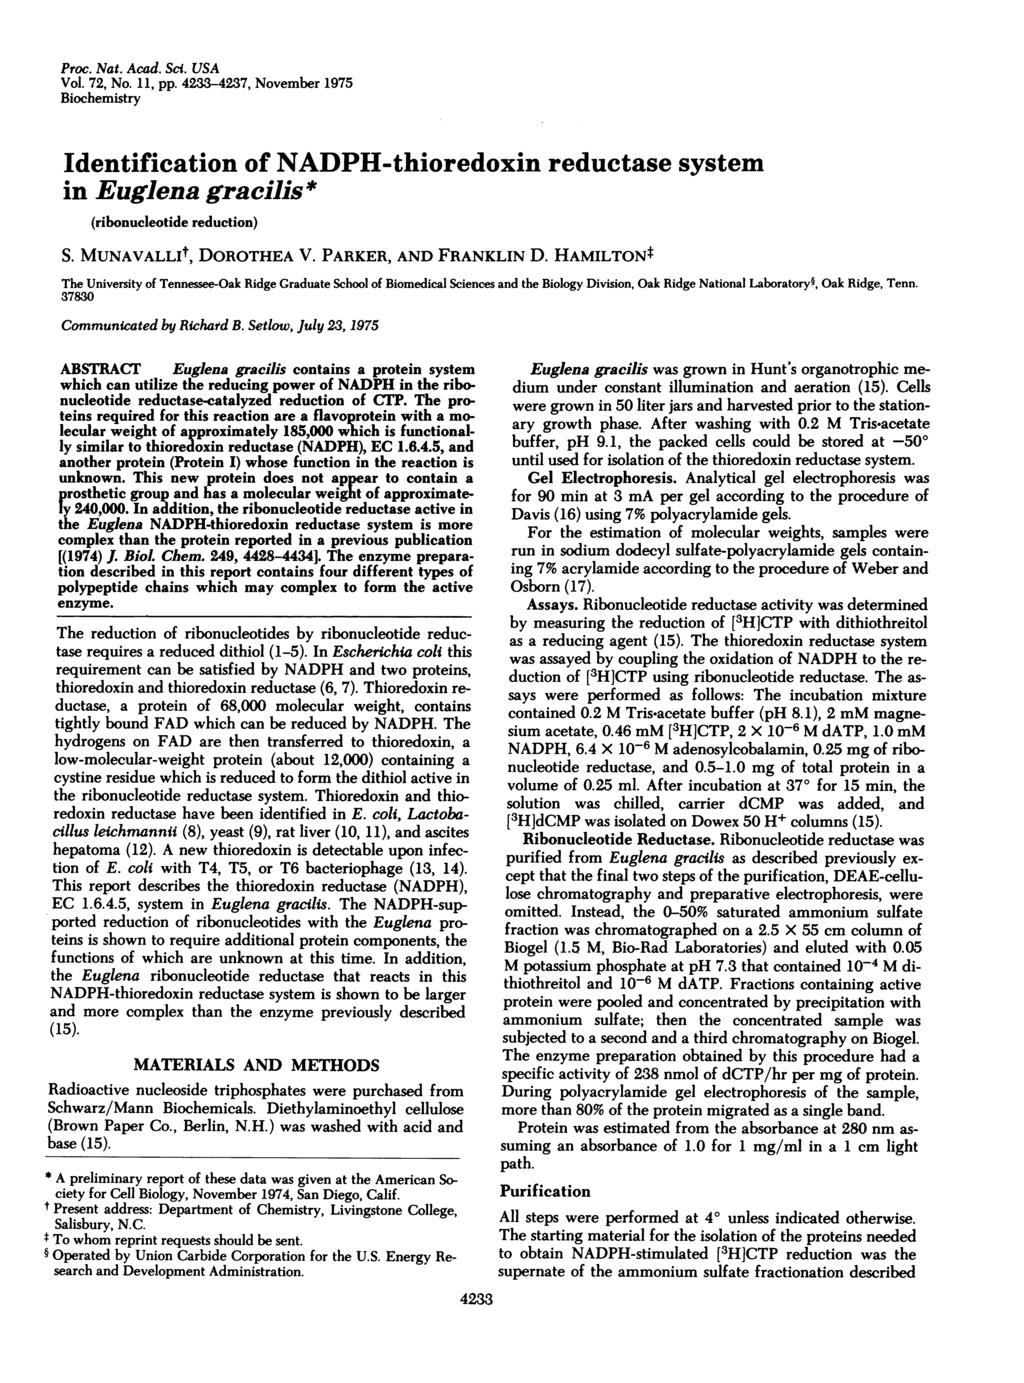 Proc. Nat. Acad. Sci. USA Vol. 72, No. 11, pp. 4233-4237, November 1975 Biochemistry Identification of NADPH-thioredoxin reductase system in Euglena gracilis* (ribonucleotide reduction) S.